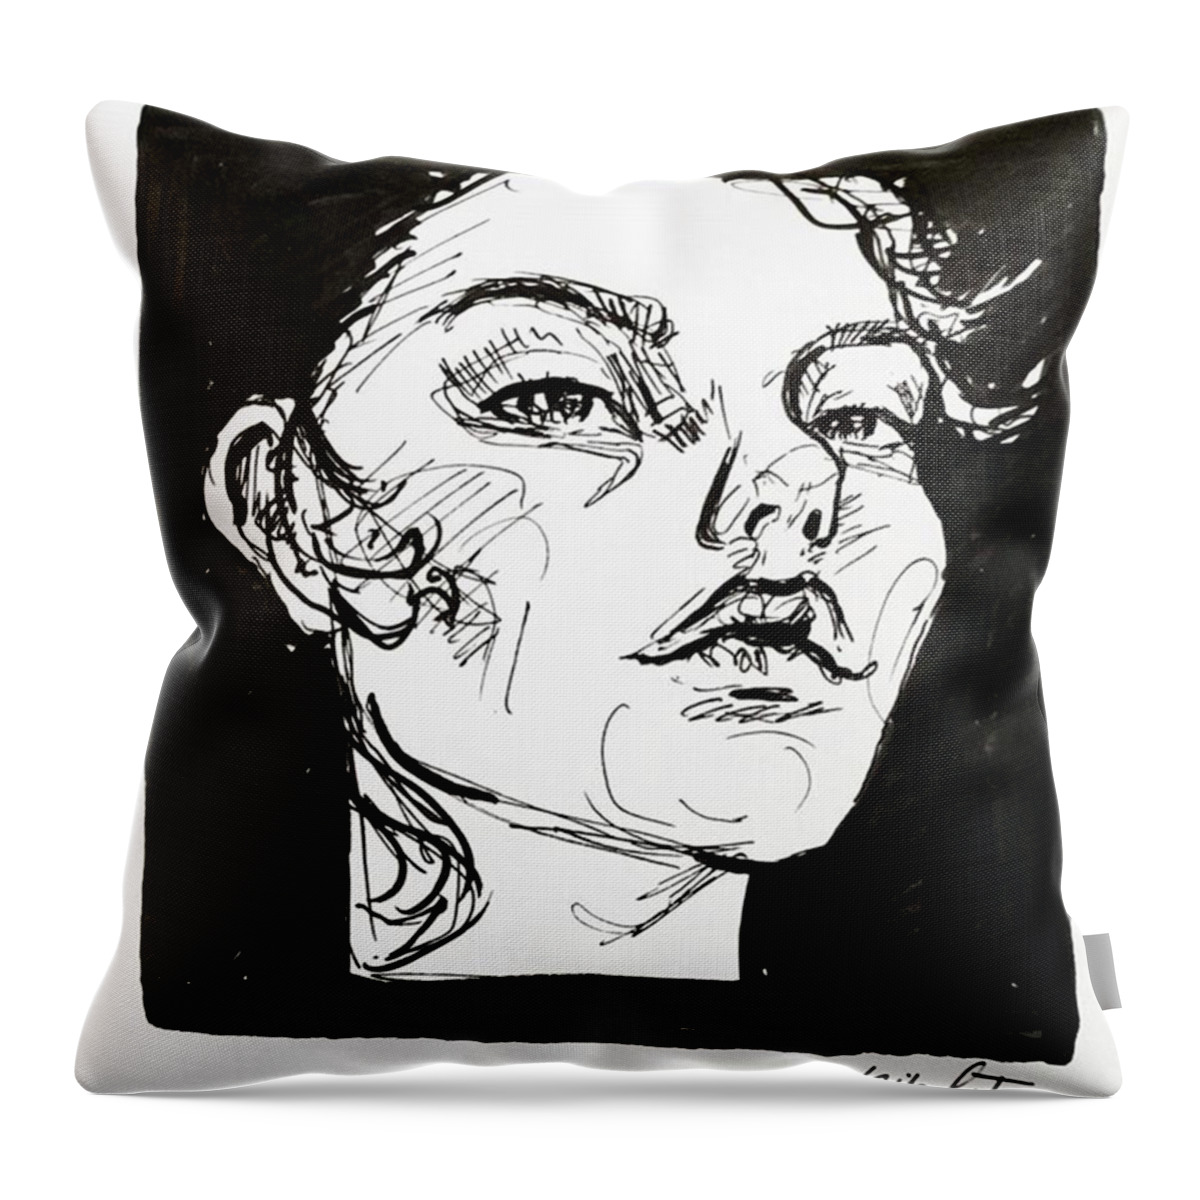 Inkdrawing Throw Pillow featuring the drawing Sketchbook Scribbles by Faithc Original Artwork